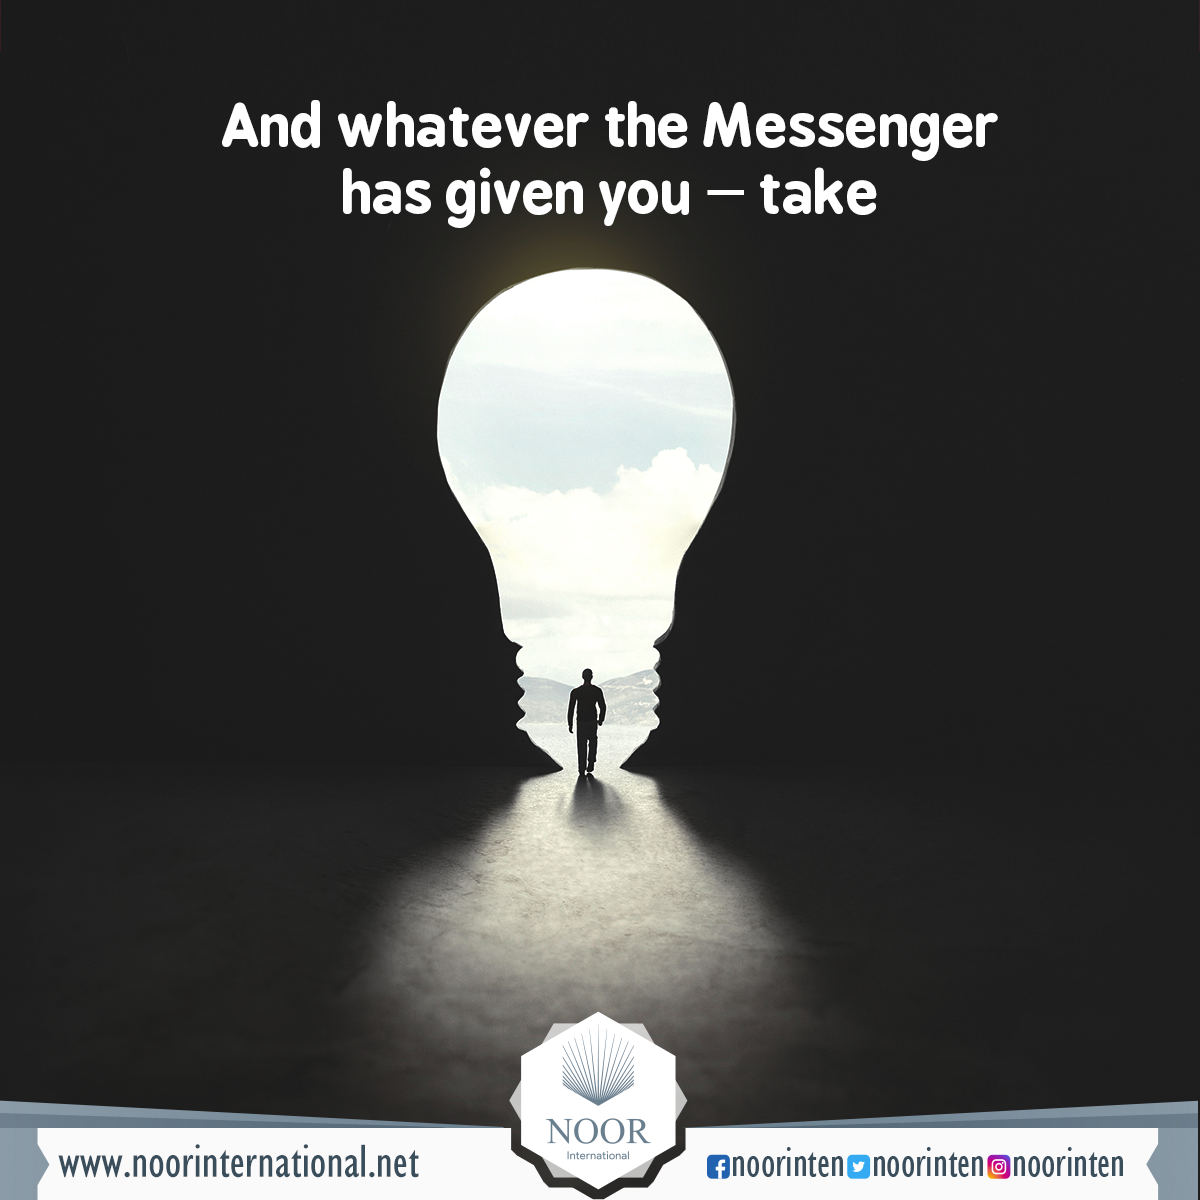 And whatever the Messenger has given you – take